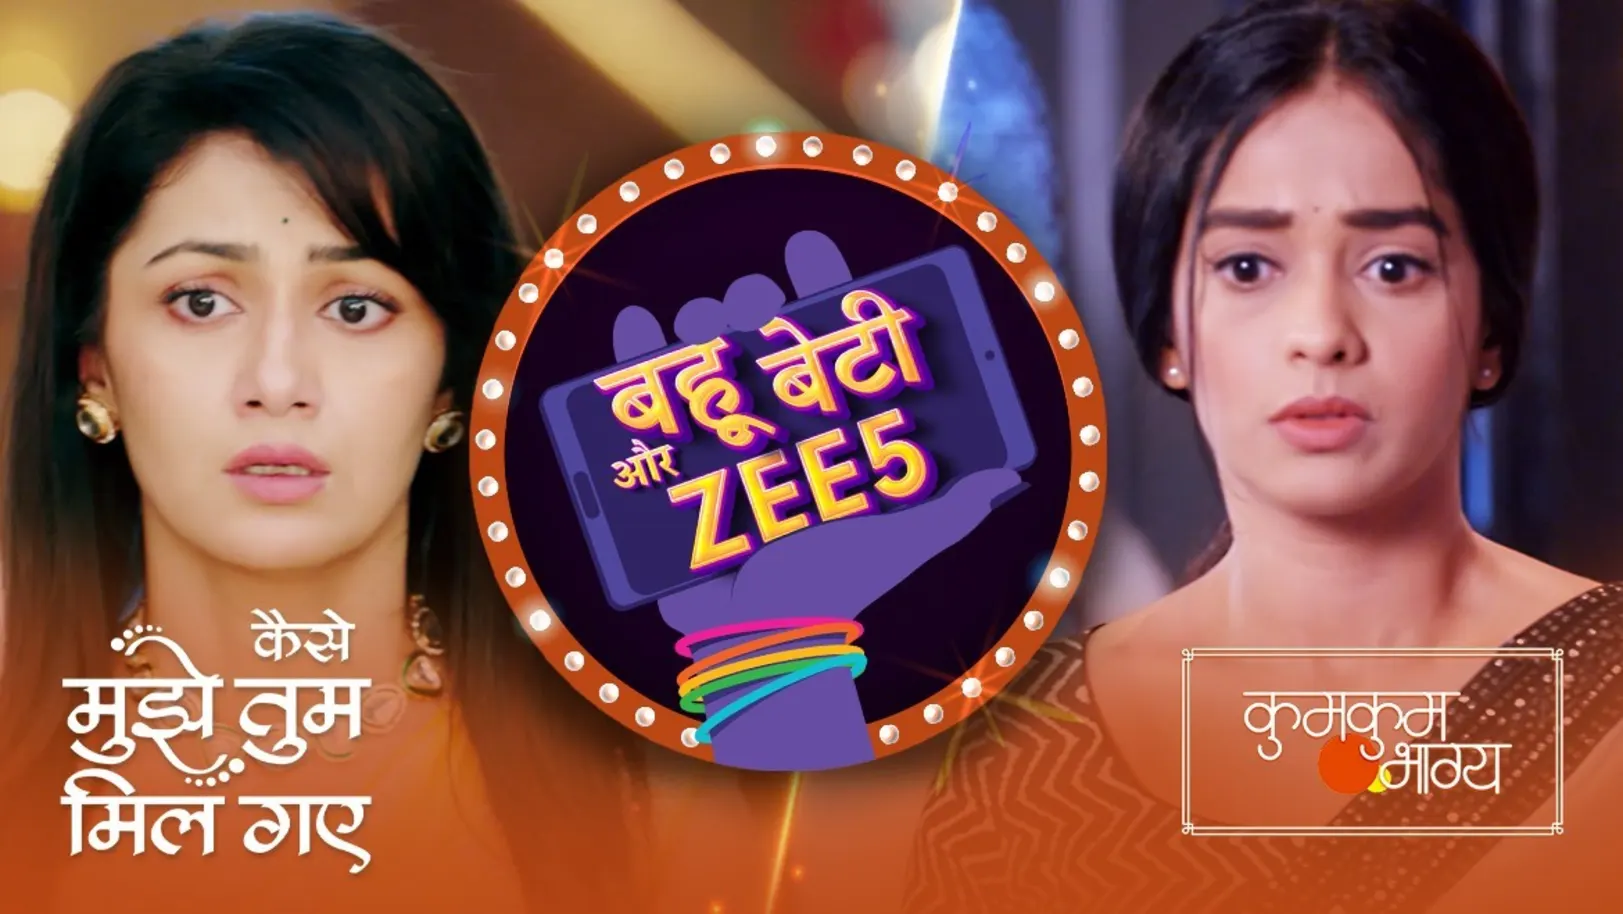 Trials and Tribulations of Relationships | Bahu Beti Aur ZEE5 Episode 21